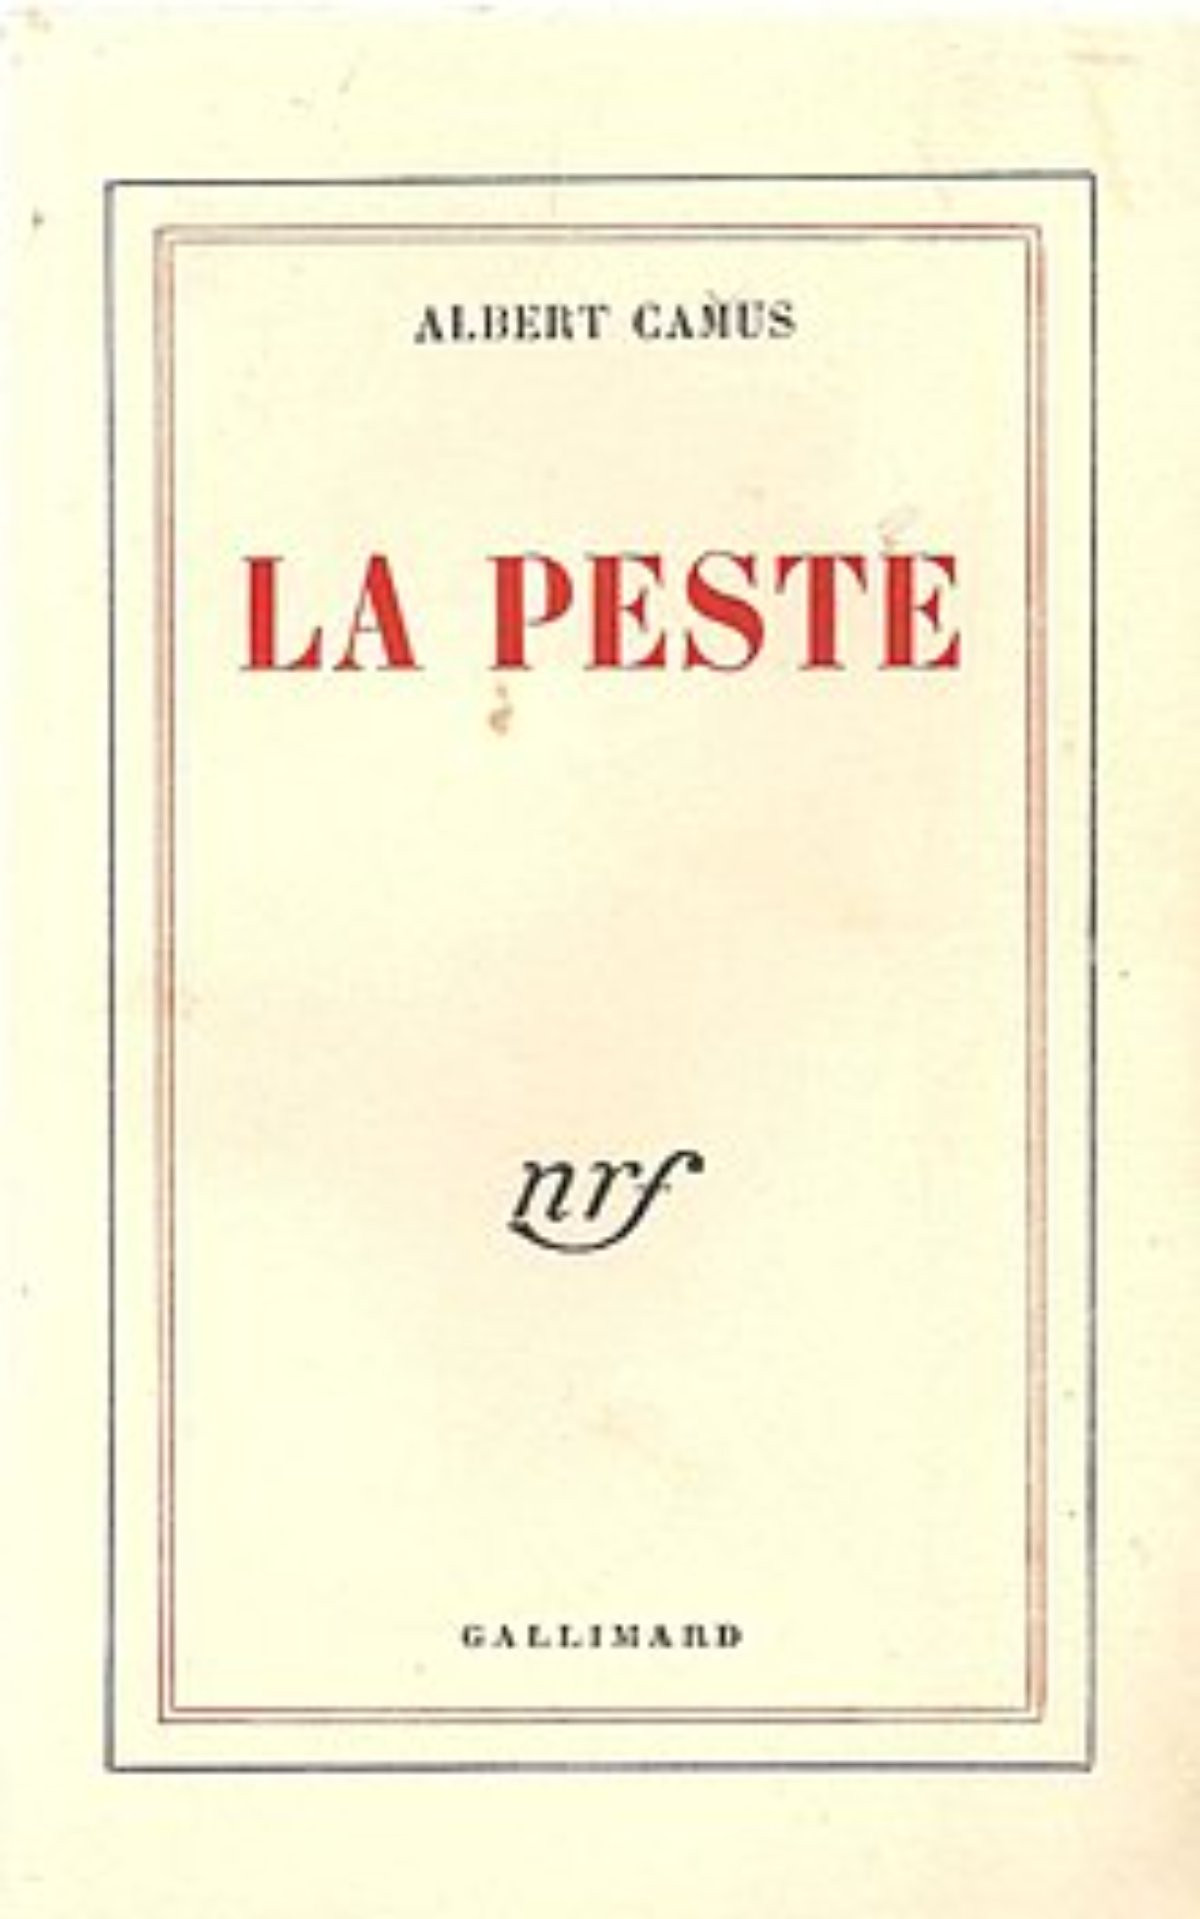 Cover of the first edition of The Plague